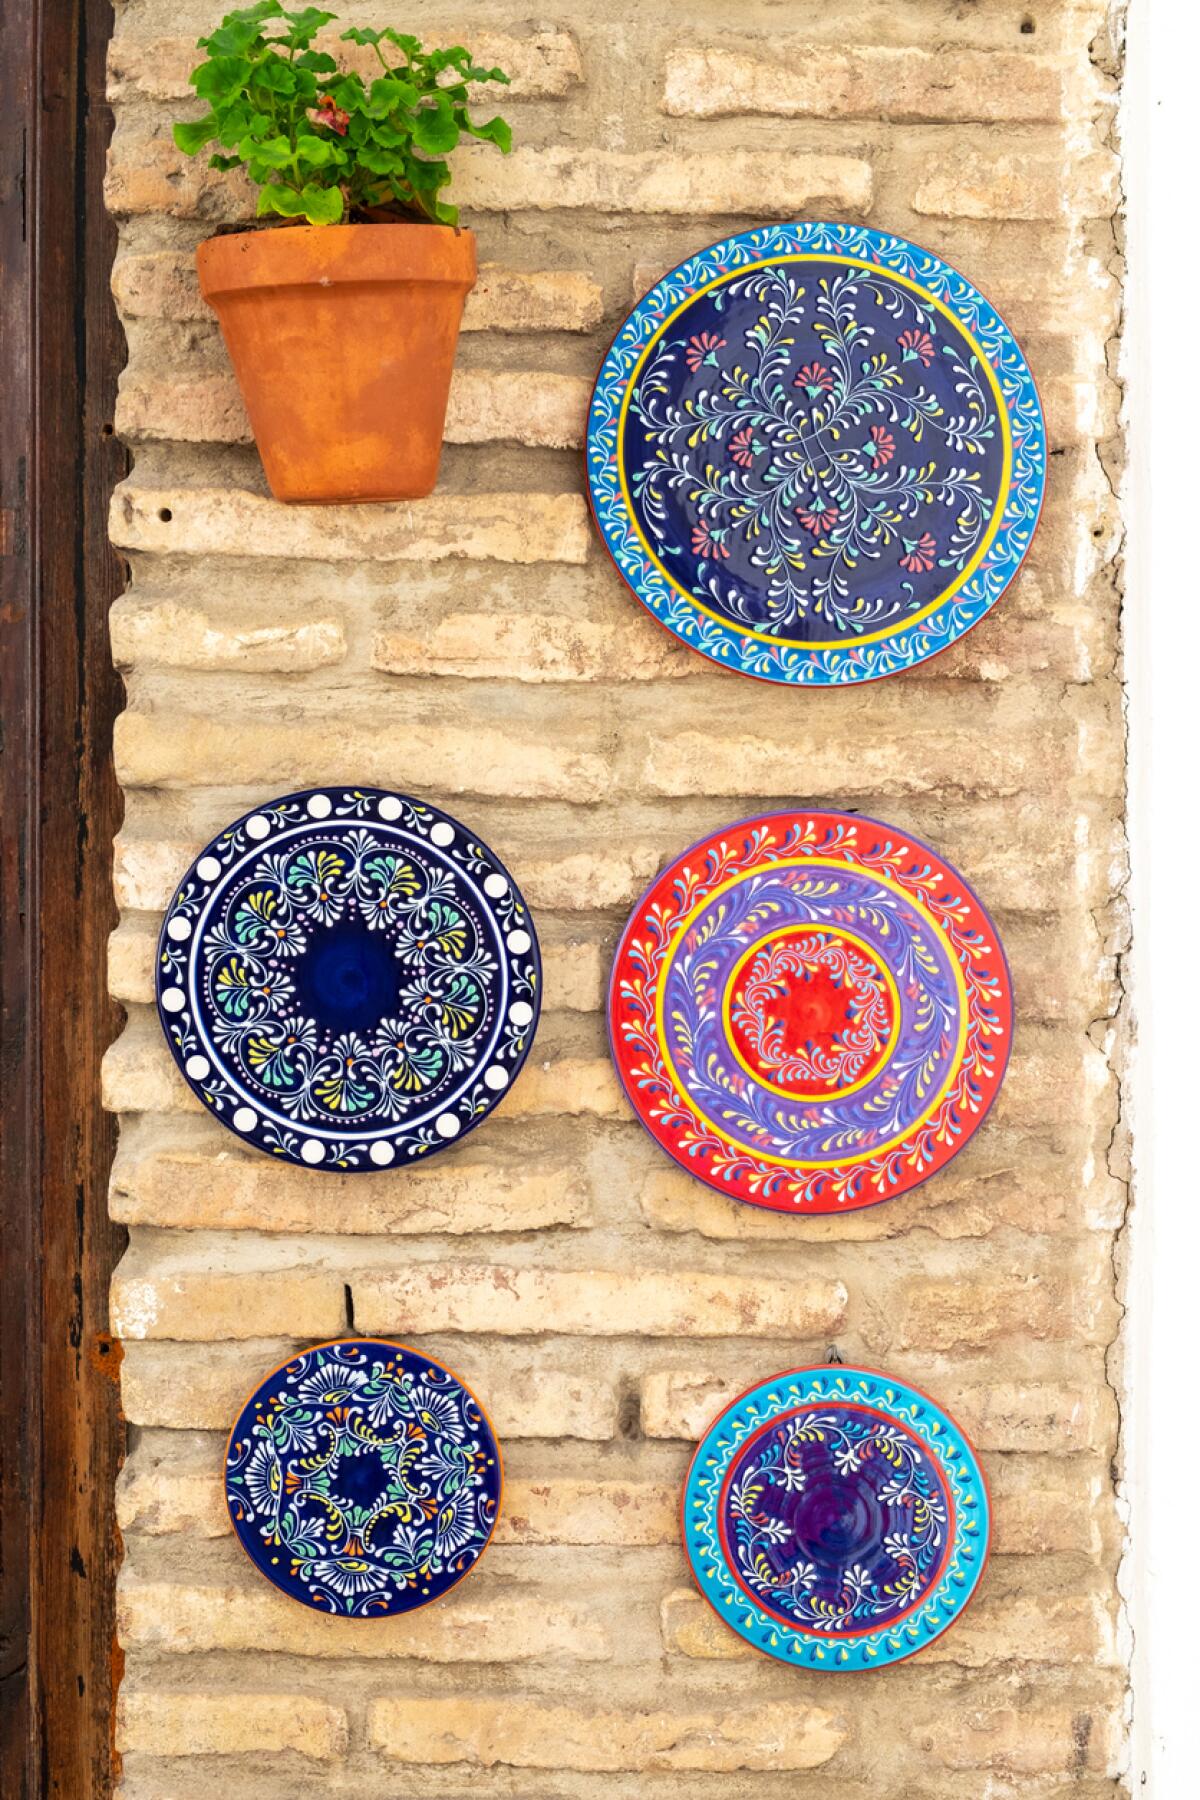 A collection of plates hangs on a narrow wall.